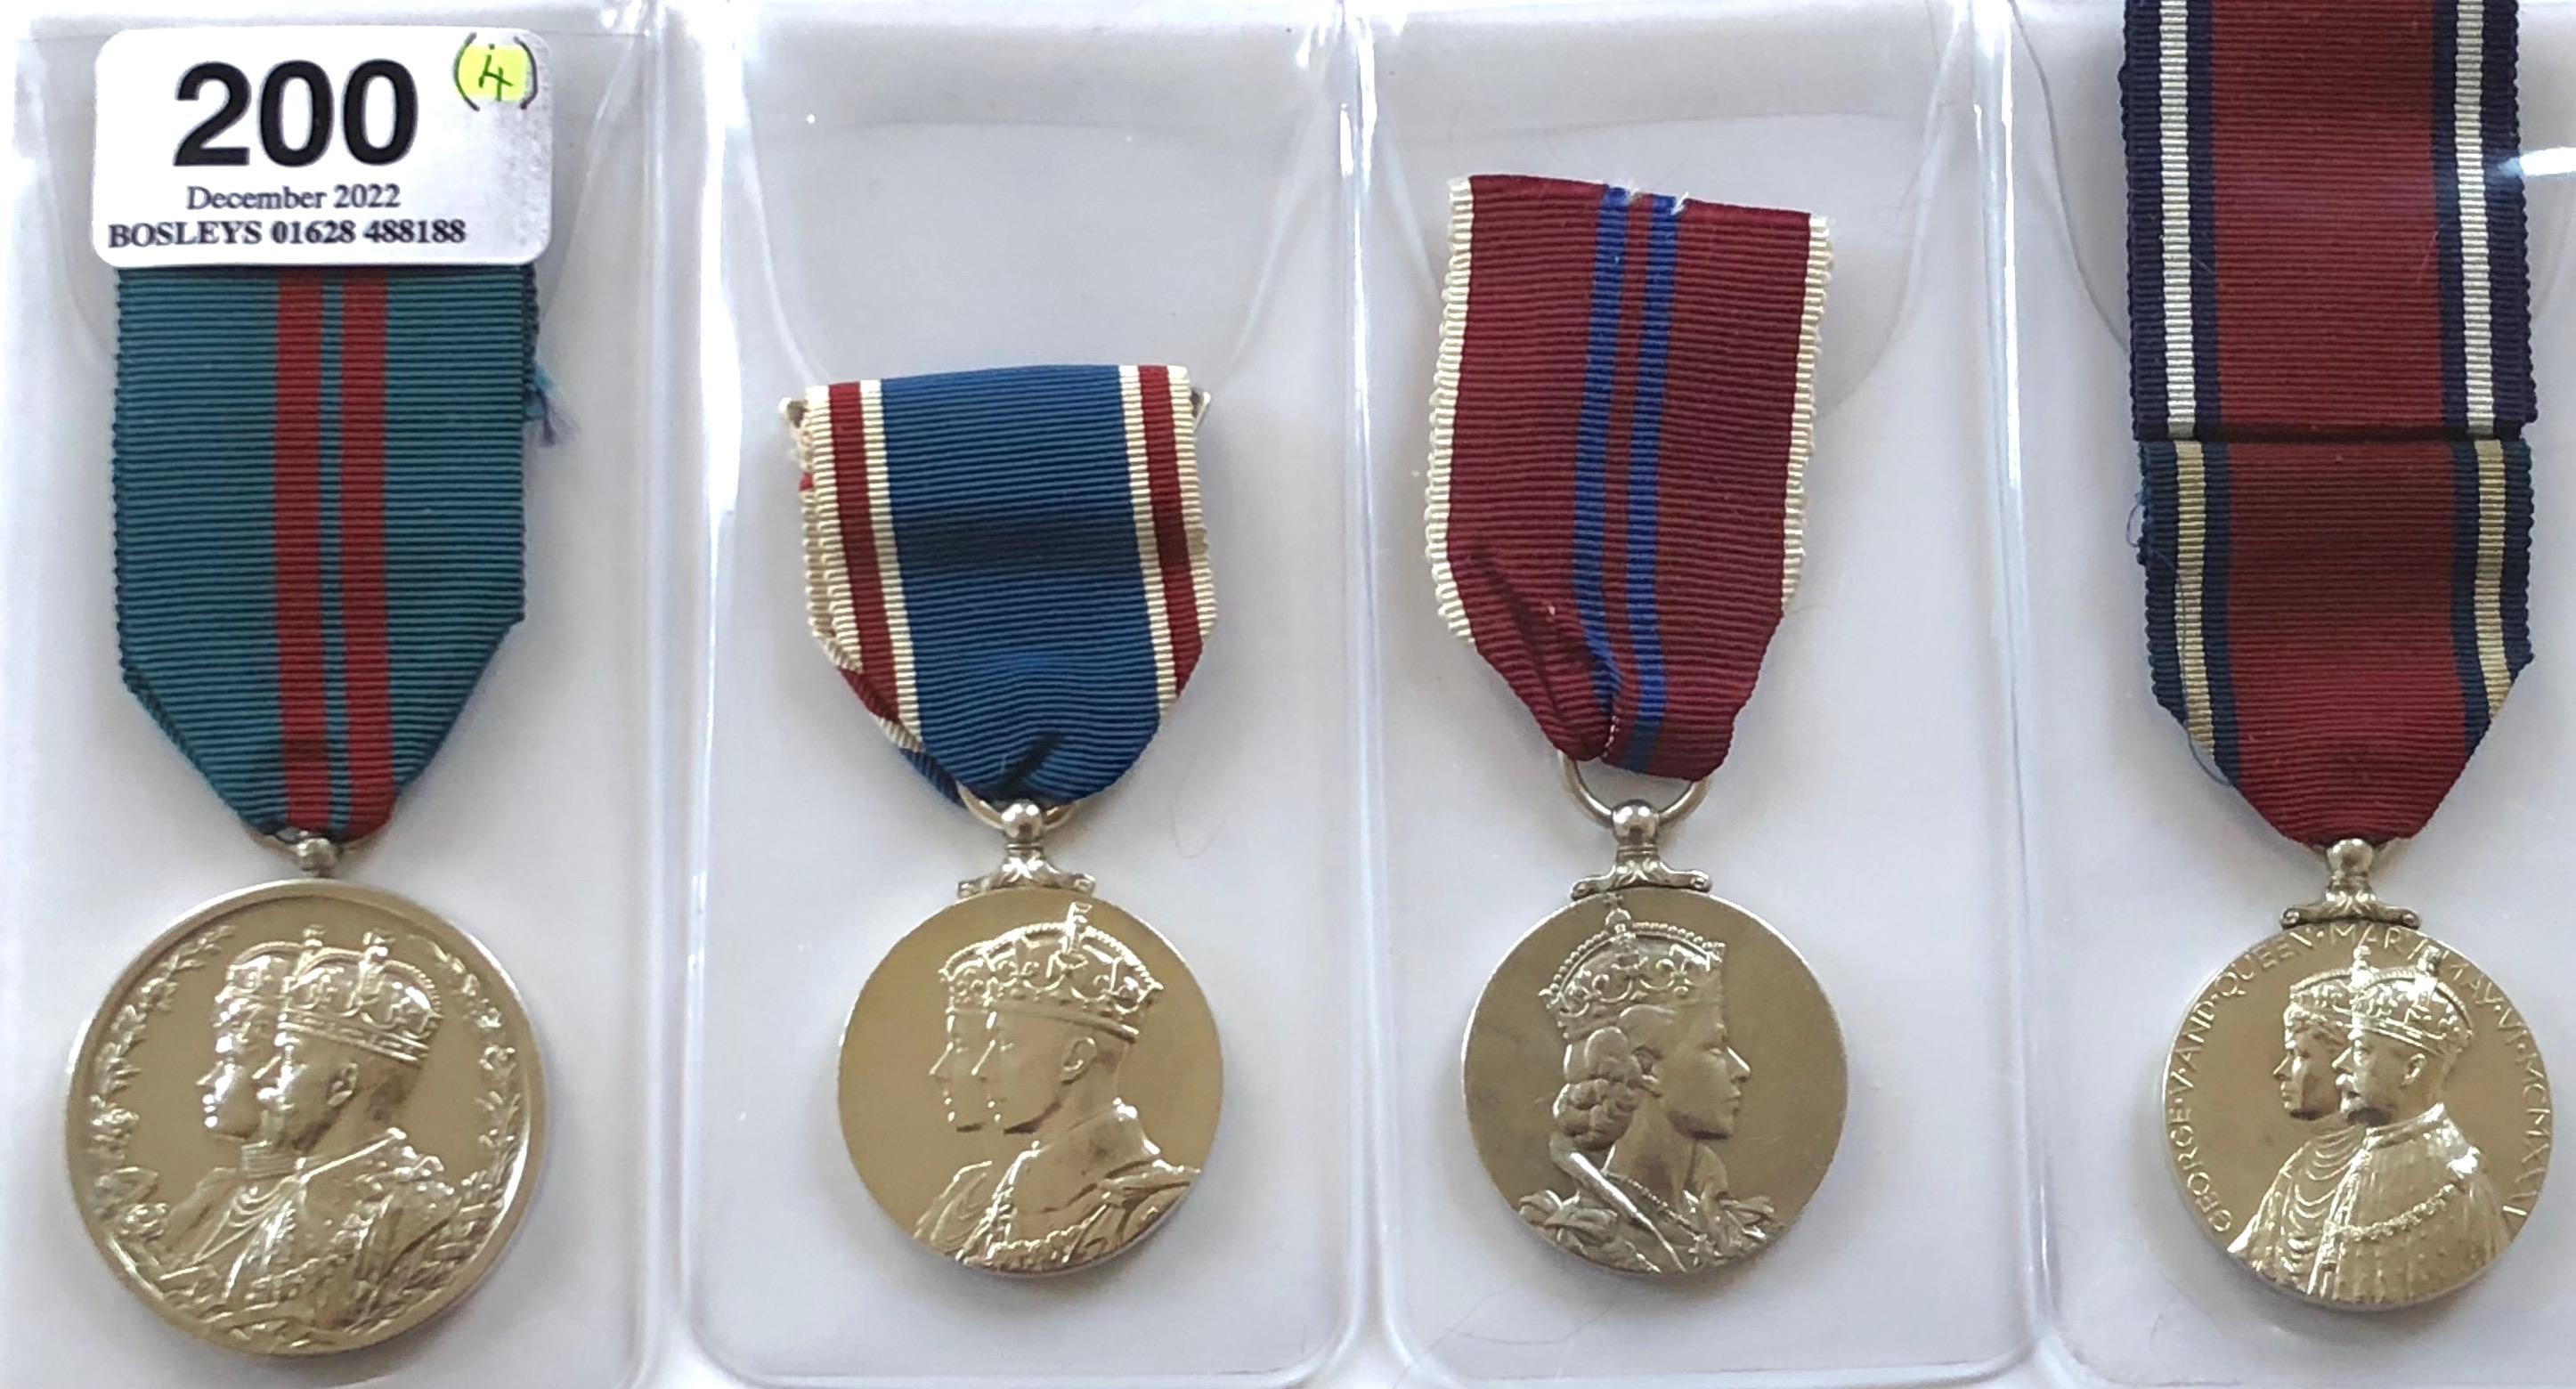 1911 George V Silver Delhi Durbar Medal & Coronation Medals. Unnamed as issued. Accompanied by